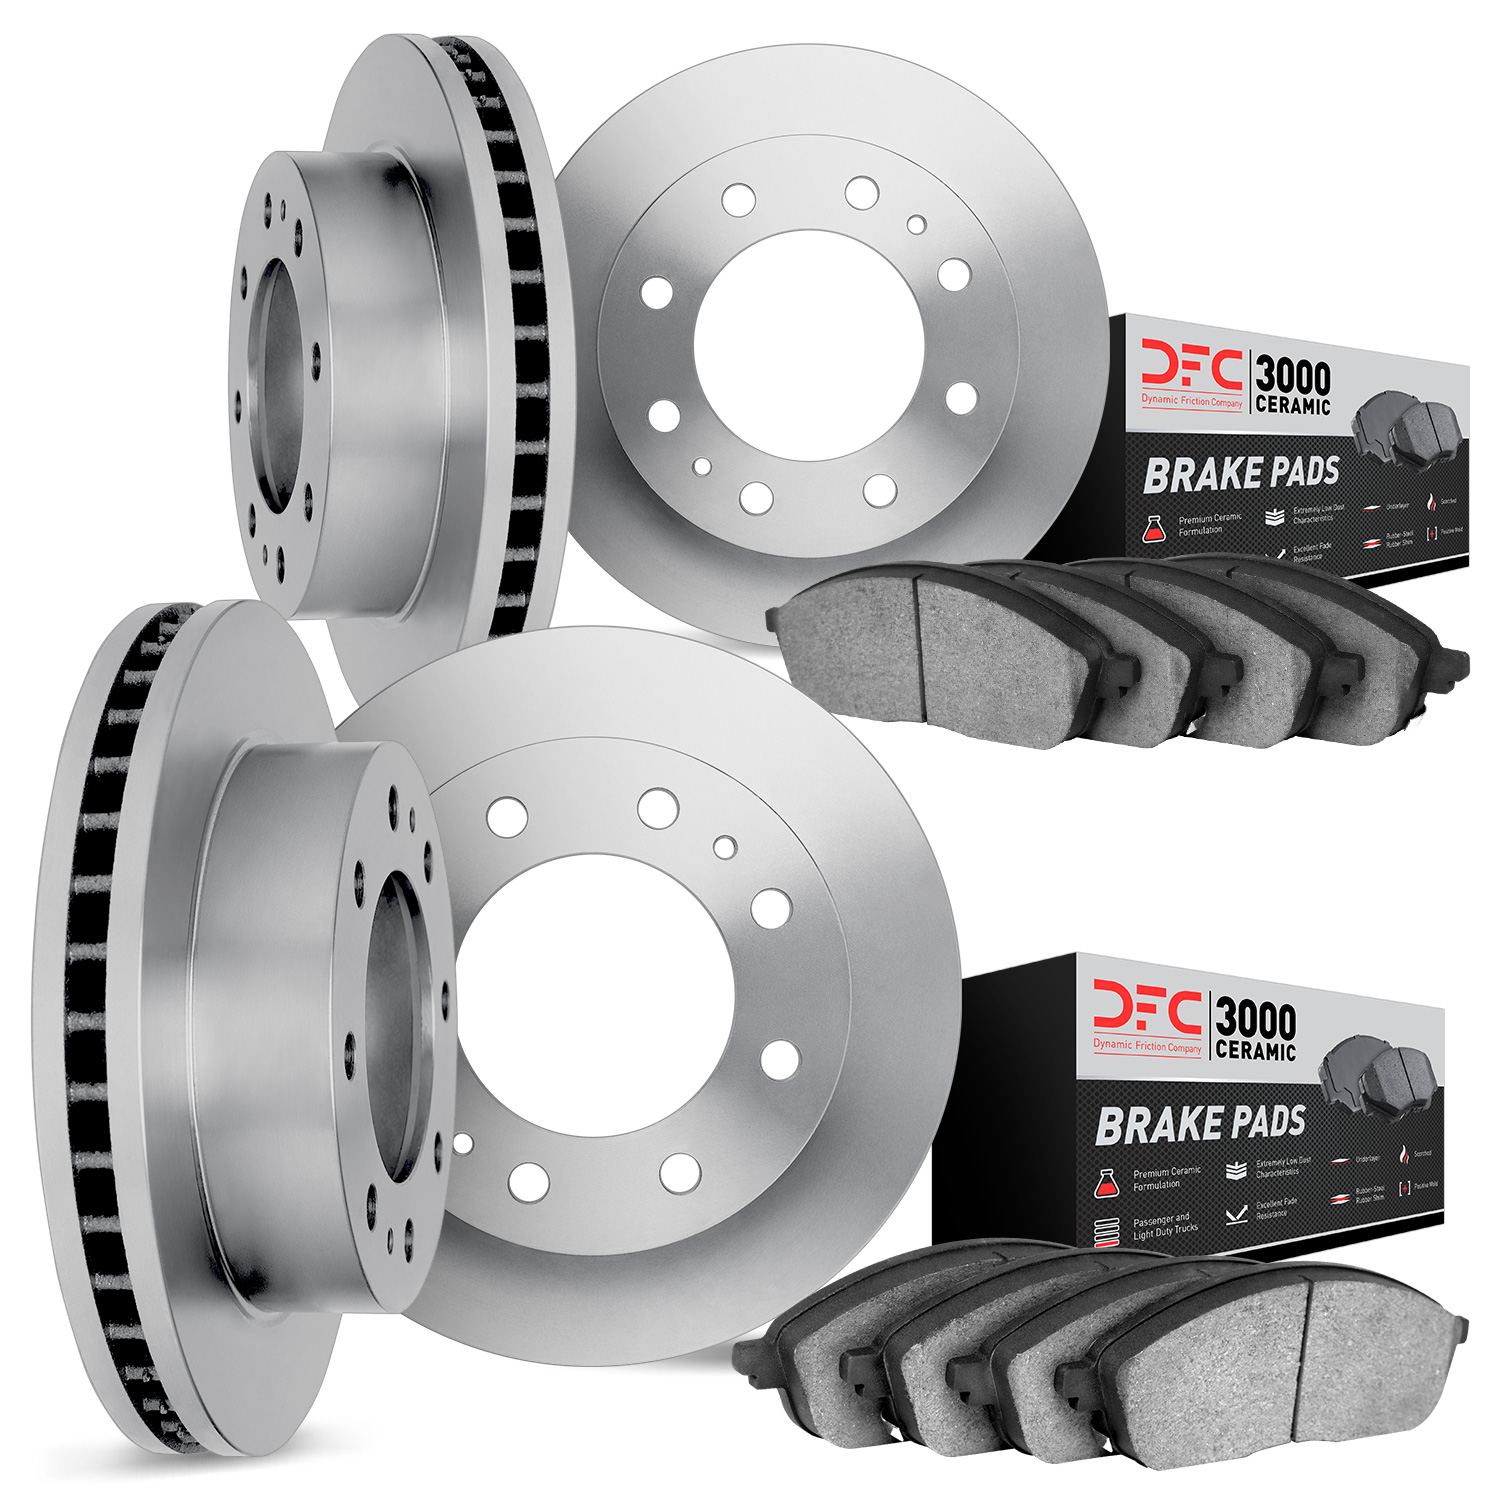 6304-40025 Brake Rotors with 3000-Series Ceramic Brake Pads Kit, 2003-2008 Mopar, Position: Front and Rear